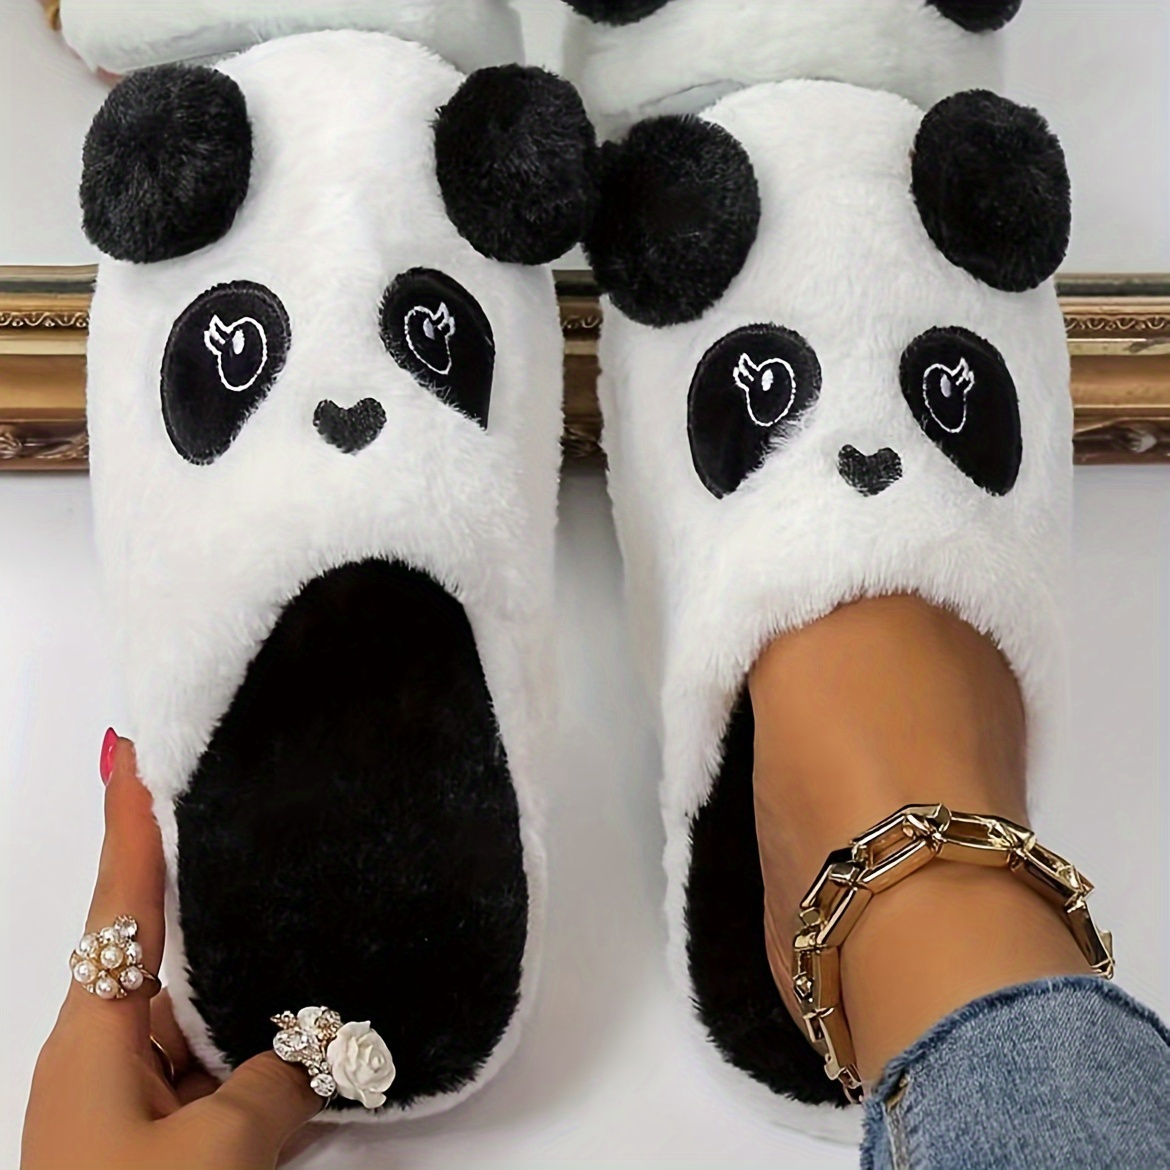 

Cute Panda Design Slippers, Casual Slip On Plush Lined Shoes, Comfortable Indoor Home Slippers